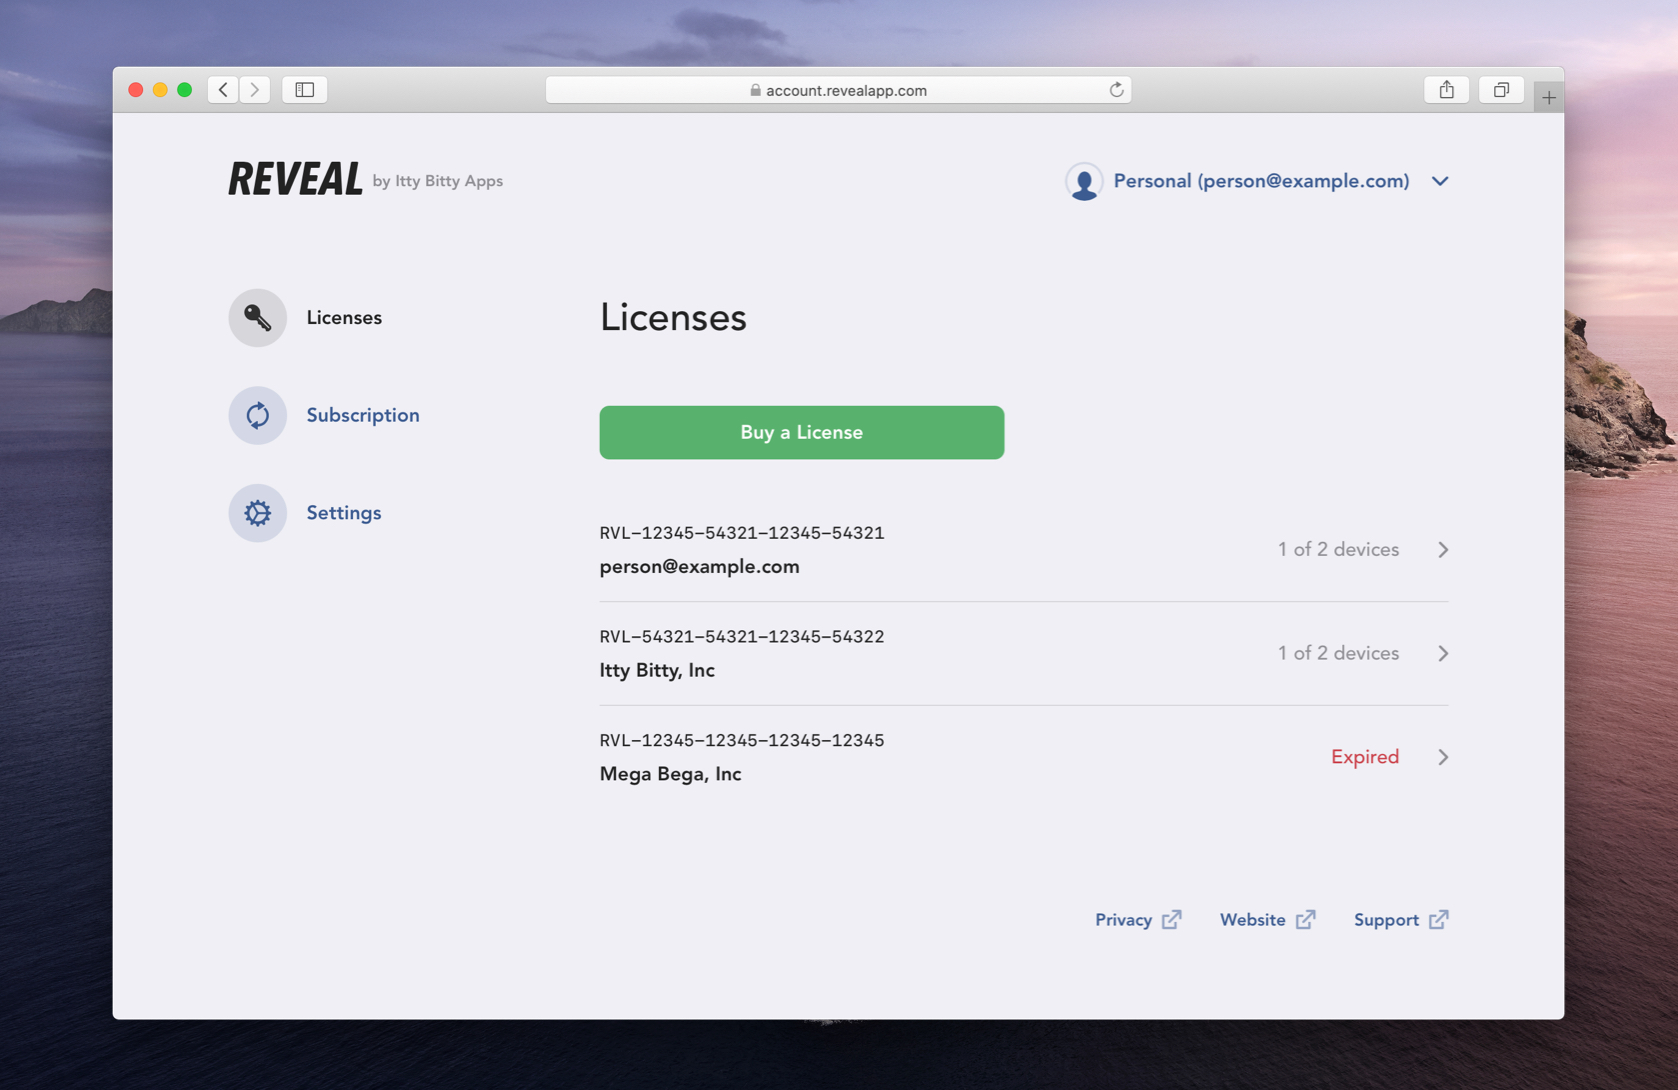 You can now view and manage all your licenses over at https://account.revealapp.com/